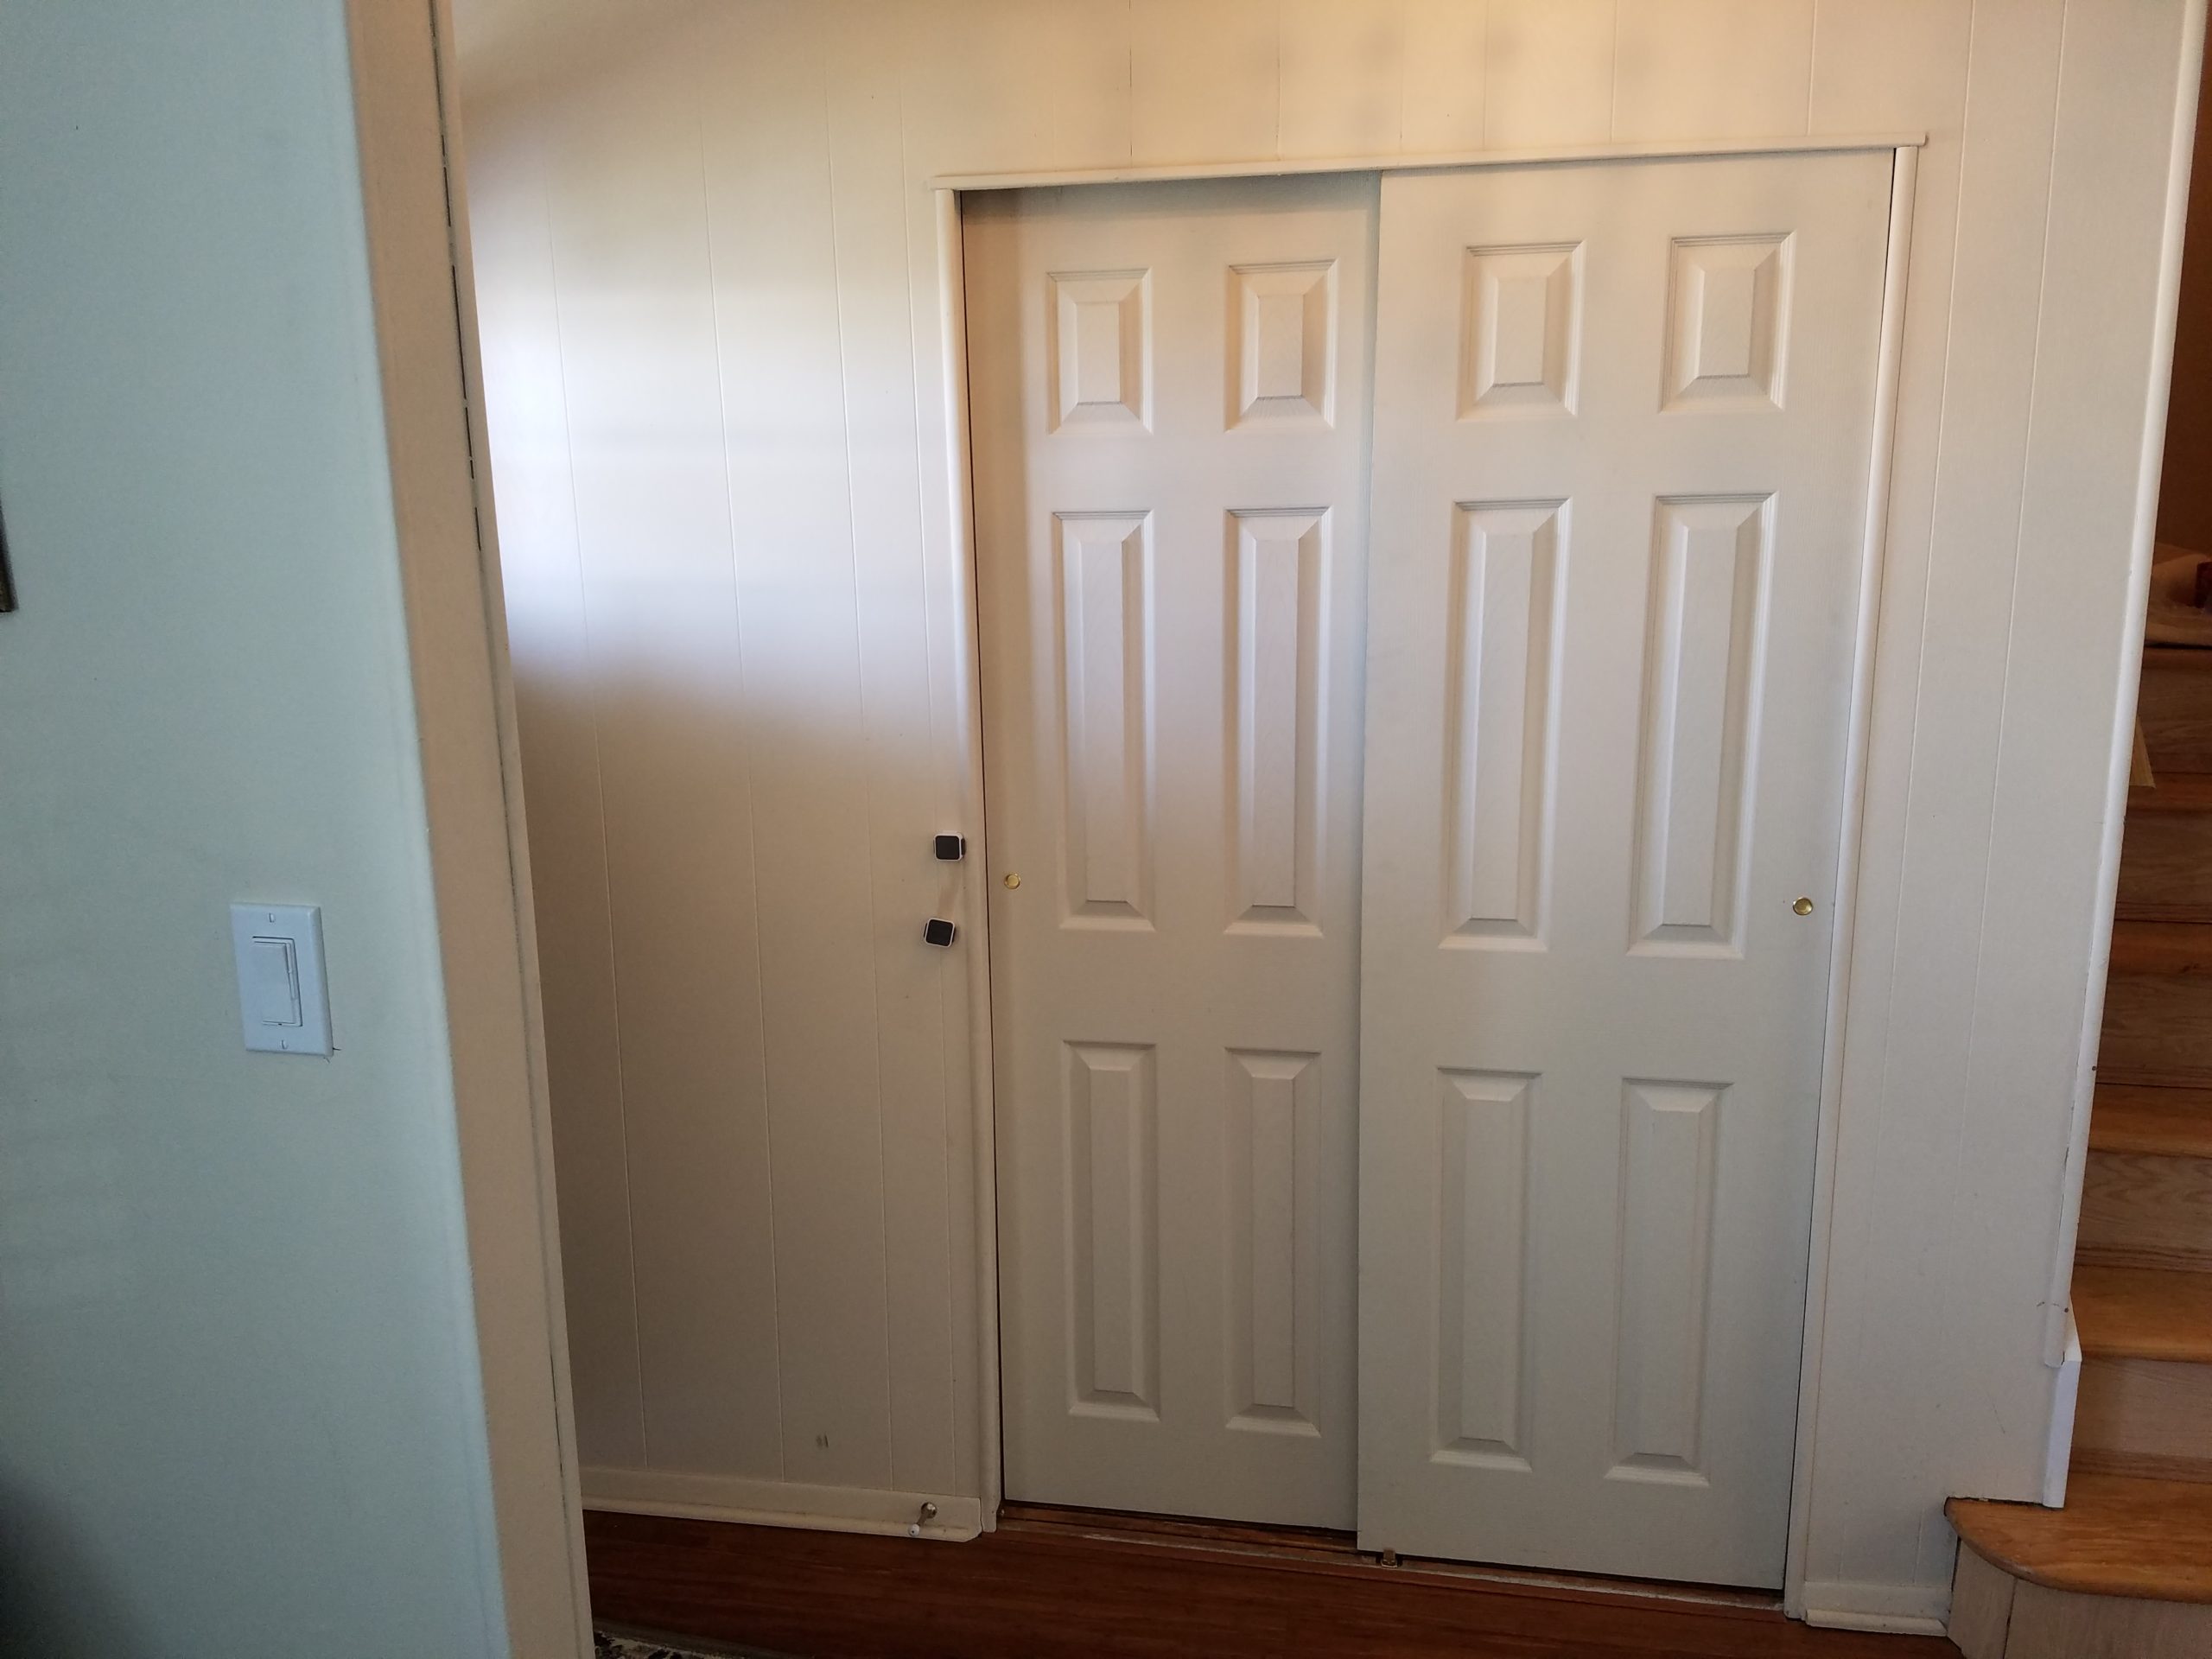 Is it easier to replace a door or the whole frame?